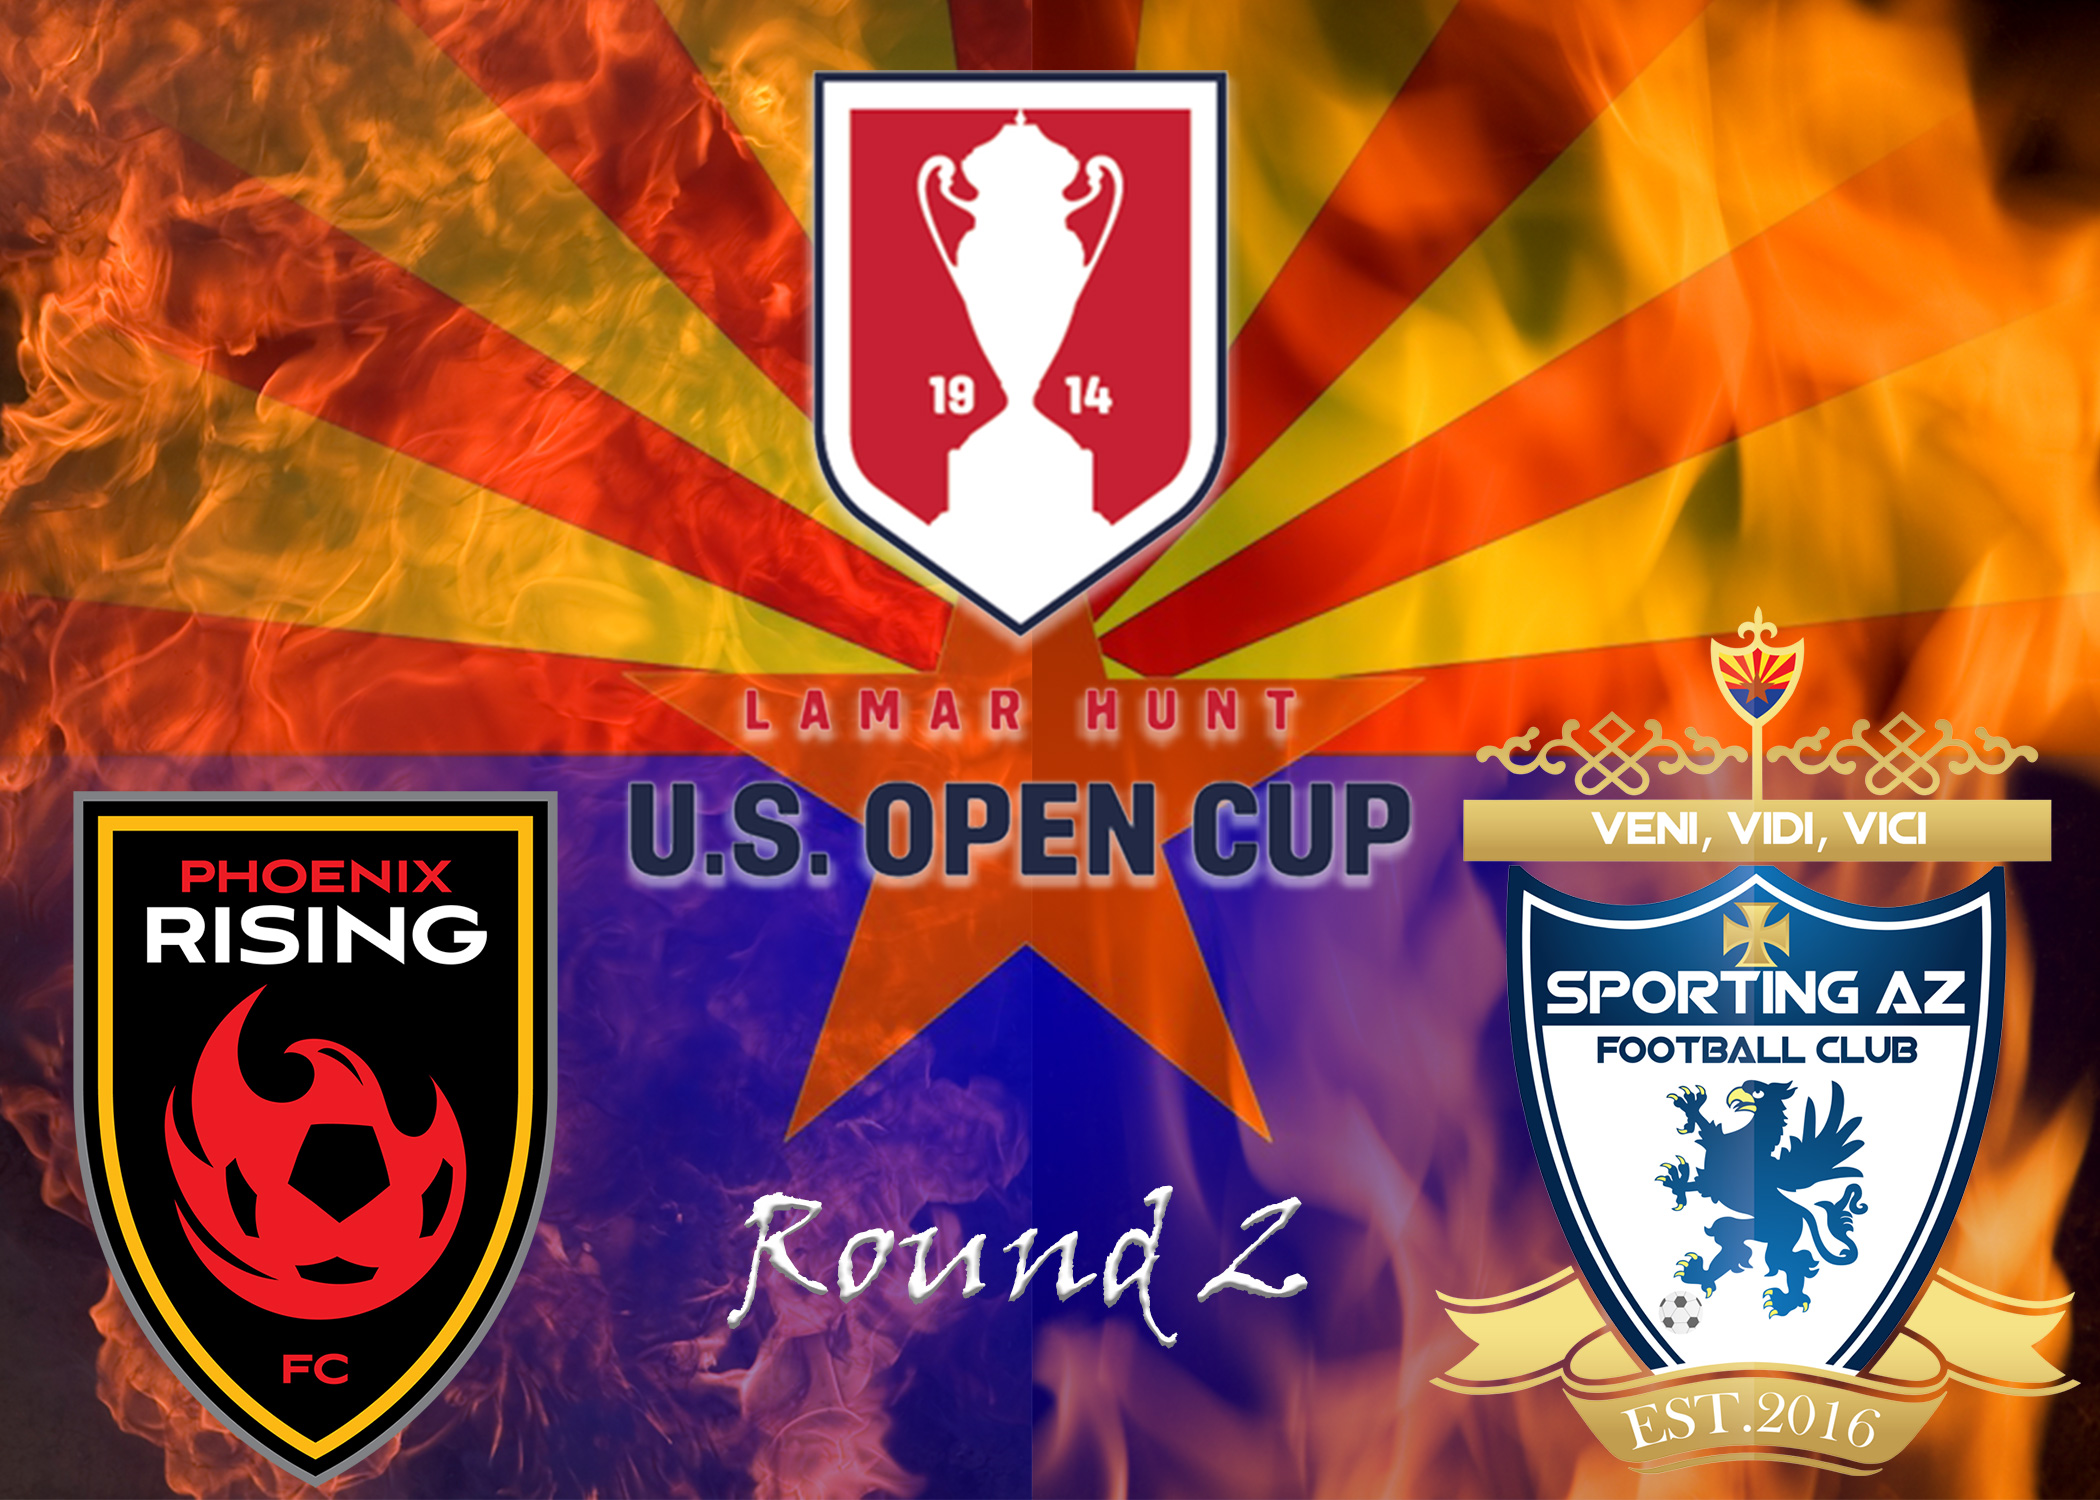 US Open Cup second round preview: Phoenix Rising FC at Sporting AZ